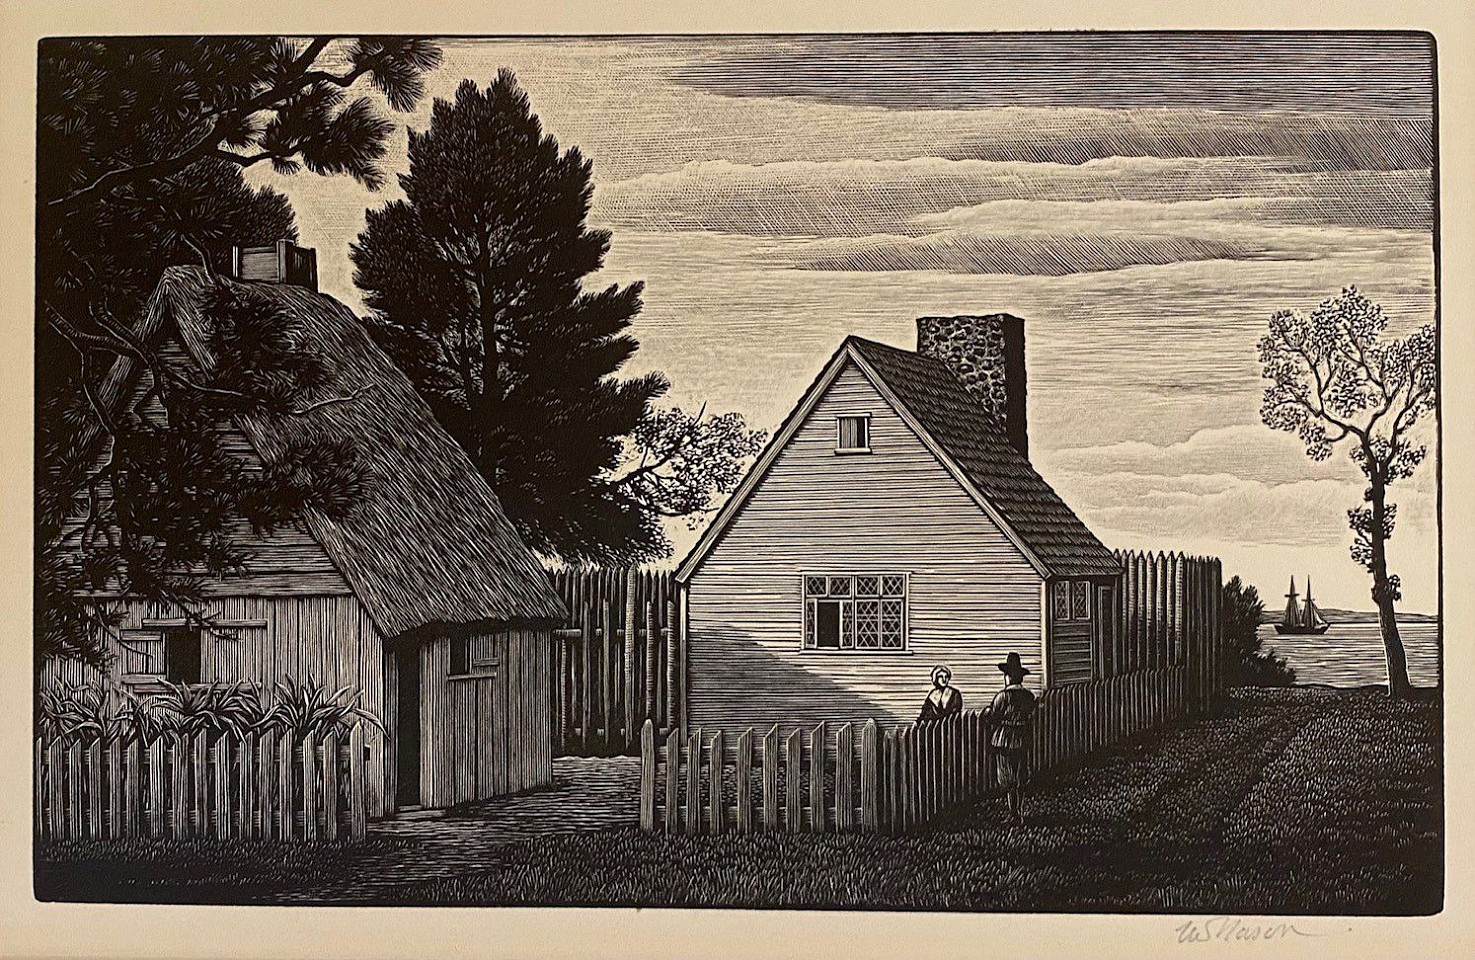 Thomas Willoughby Nason, The First House and Second House, 1955
wood engraving on paper, 4 7/8"" x 7 7/8""
JCA 6624
$950